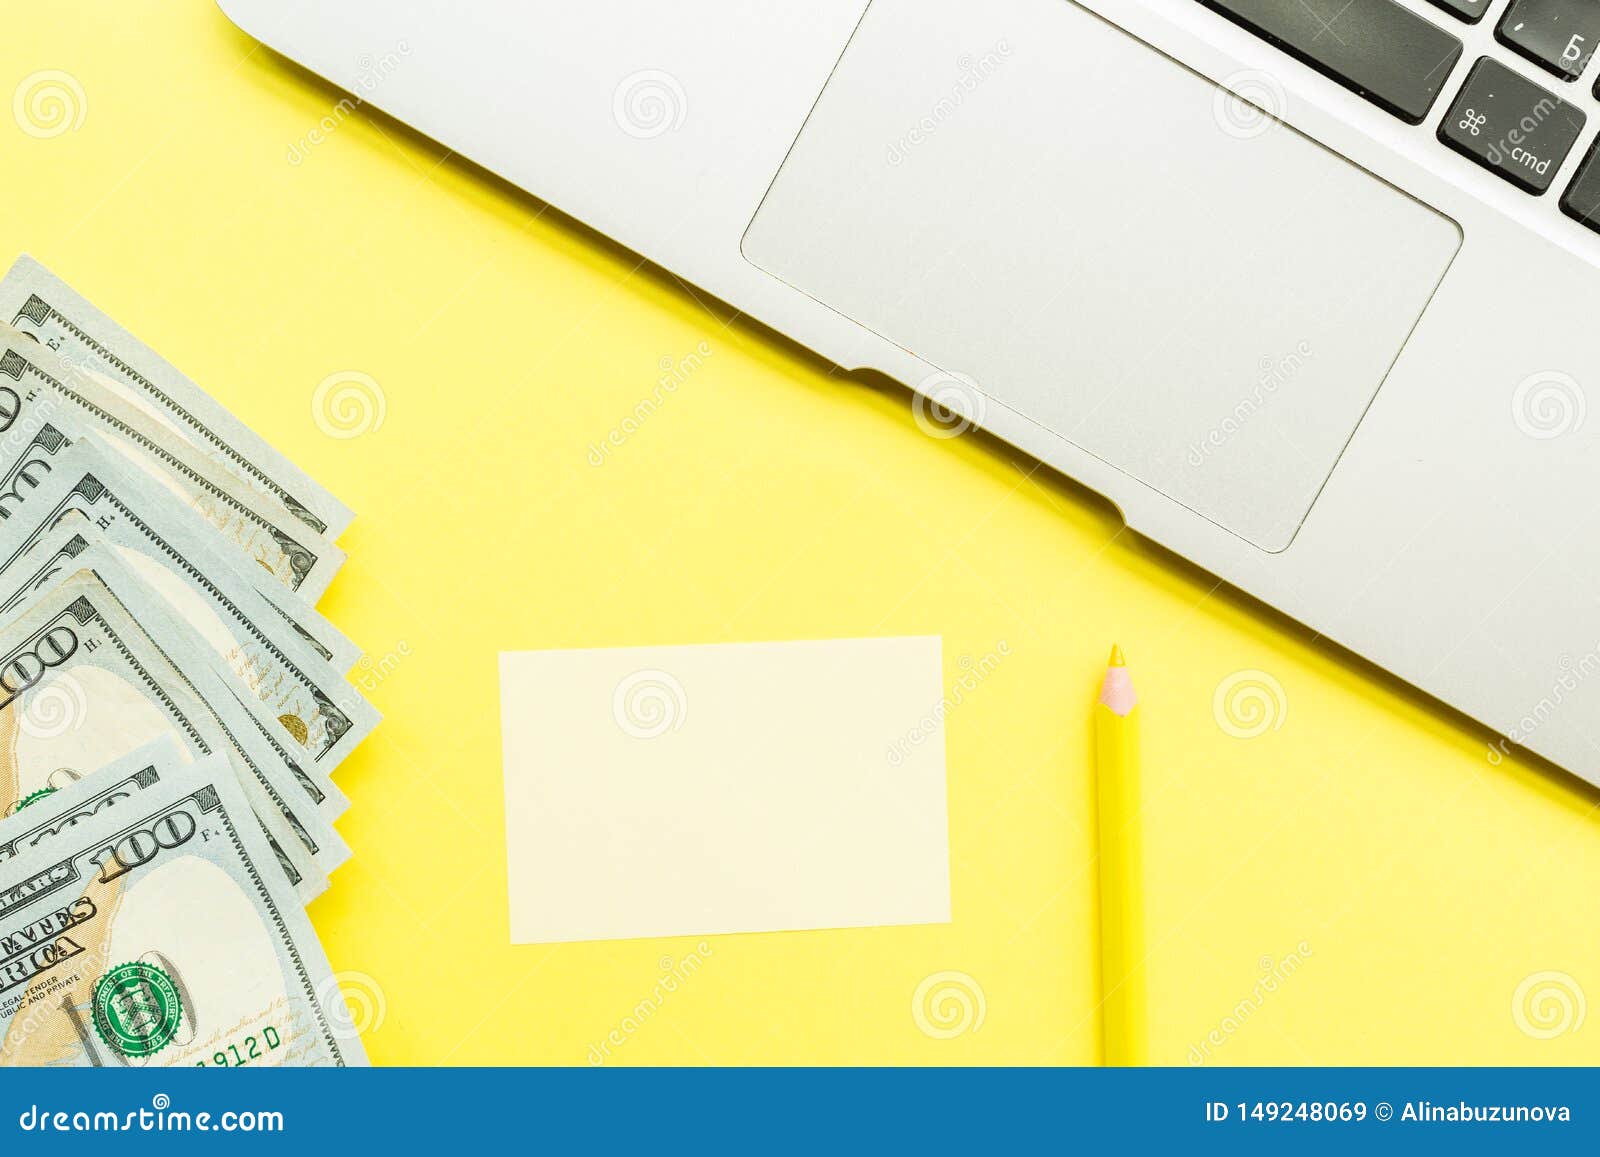 Download Mockup Blank Page With Laptop And Cash Money On Yellow Background. Top View With Copy Space For ...